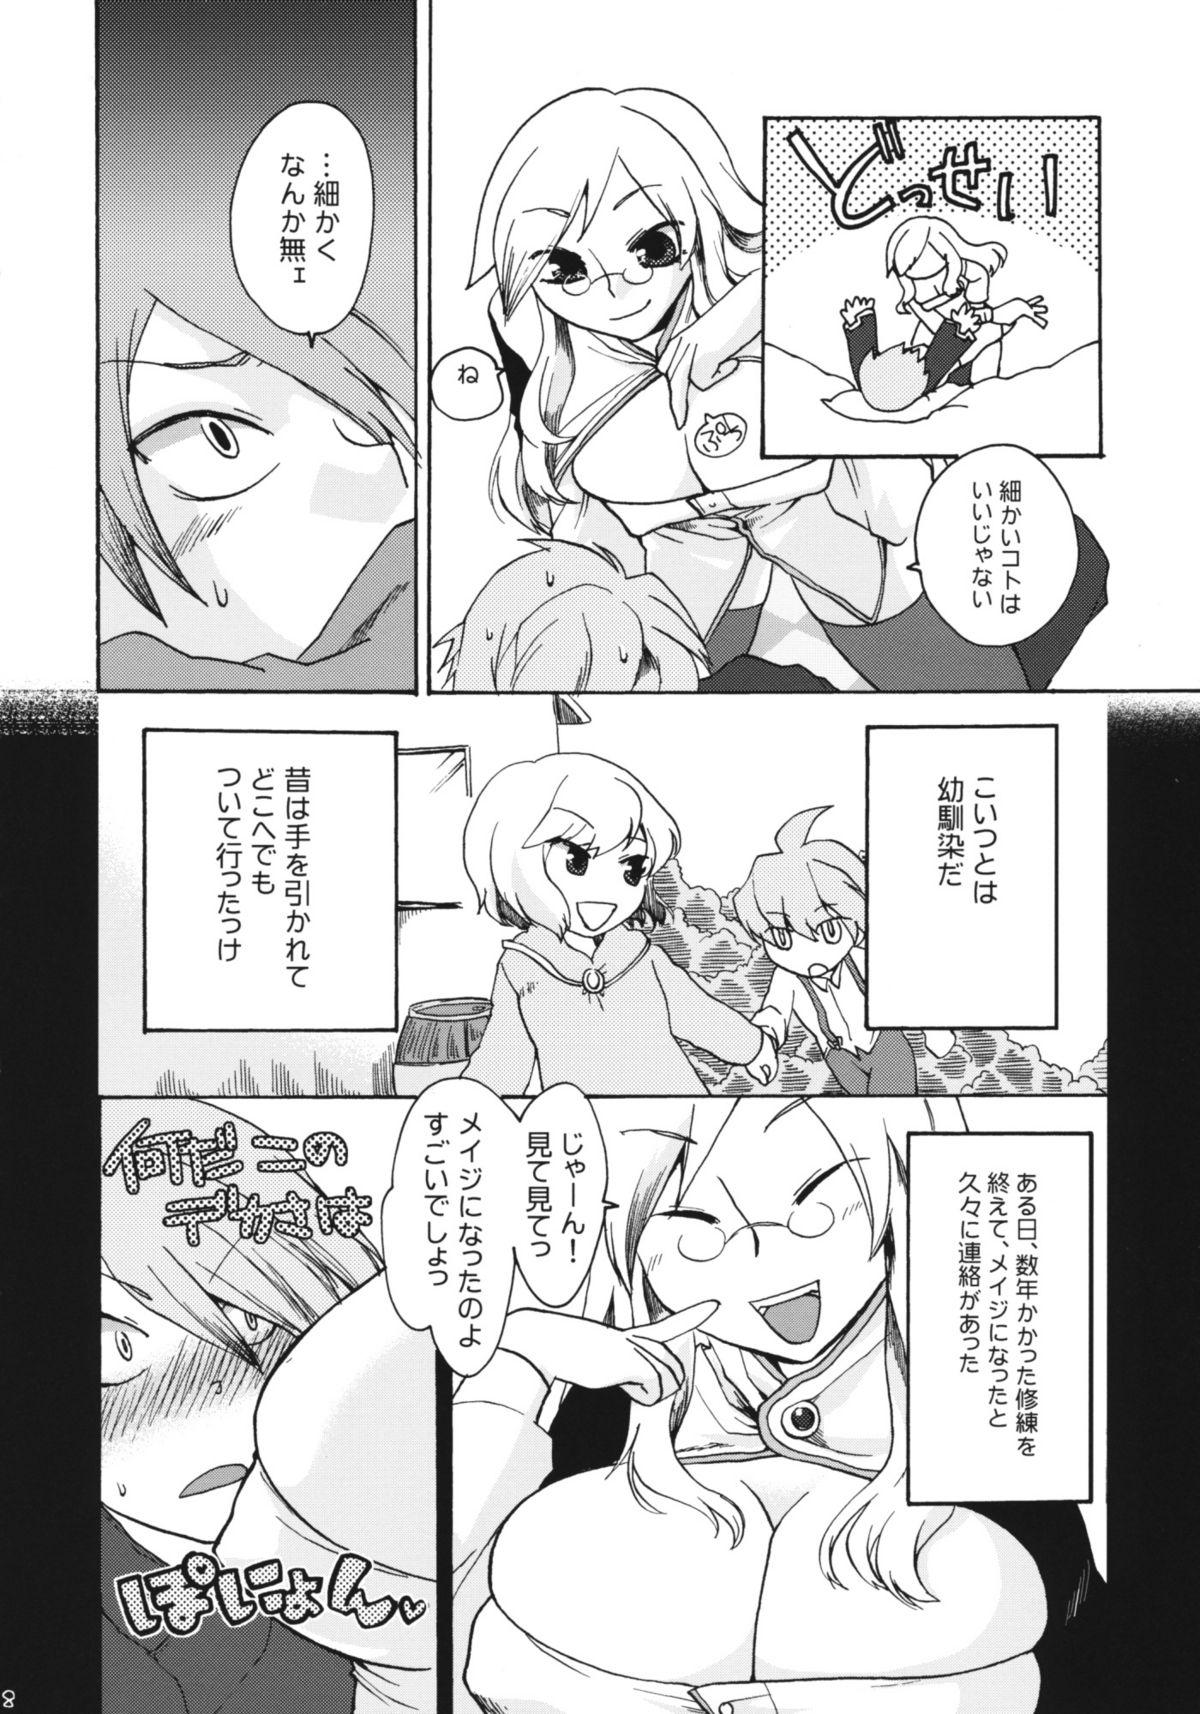 Hugetits In You And Me - 7th dragon Tgirls - Page 7